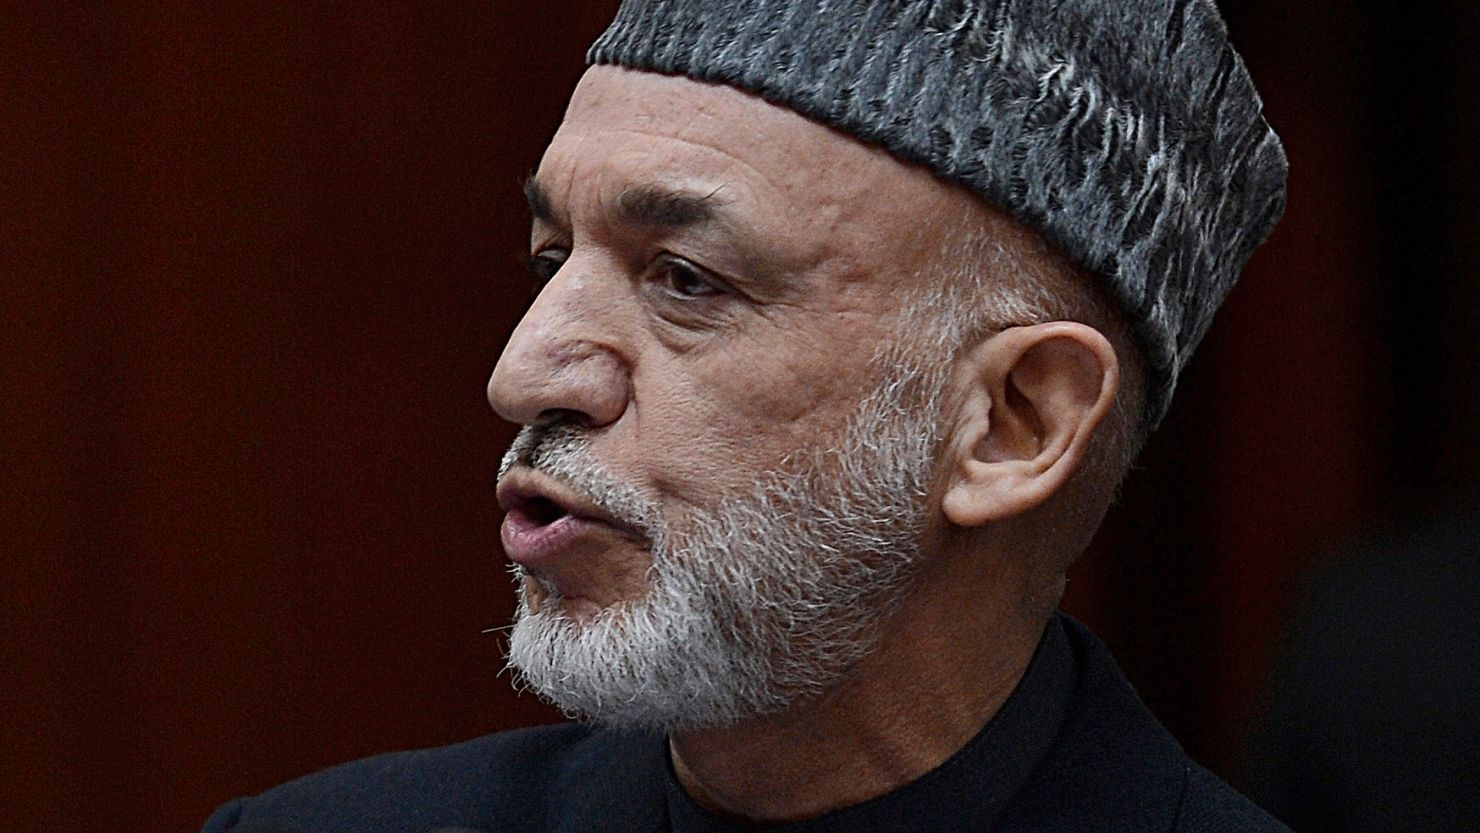 Afghan President Hamid Karzai has been adamant that all prisoners be under Afghan control.